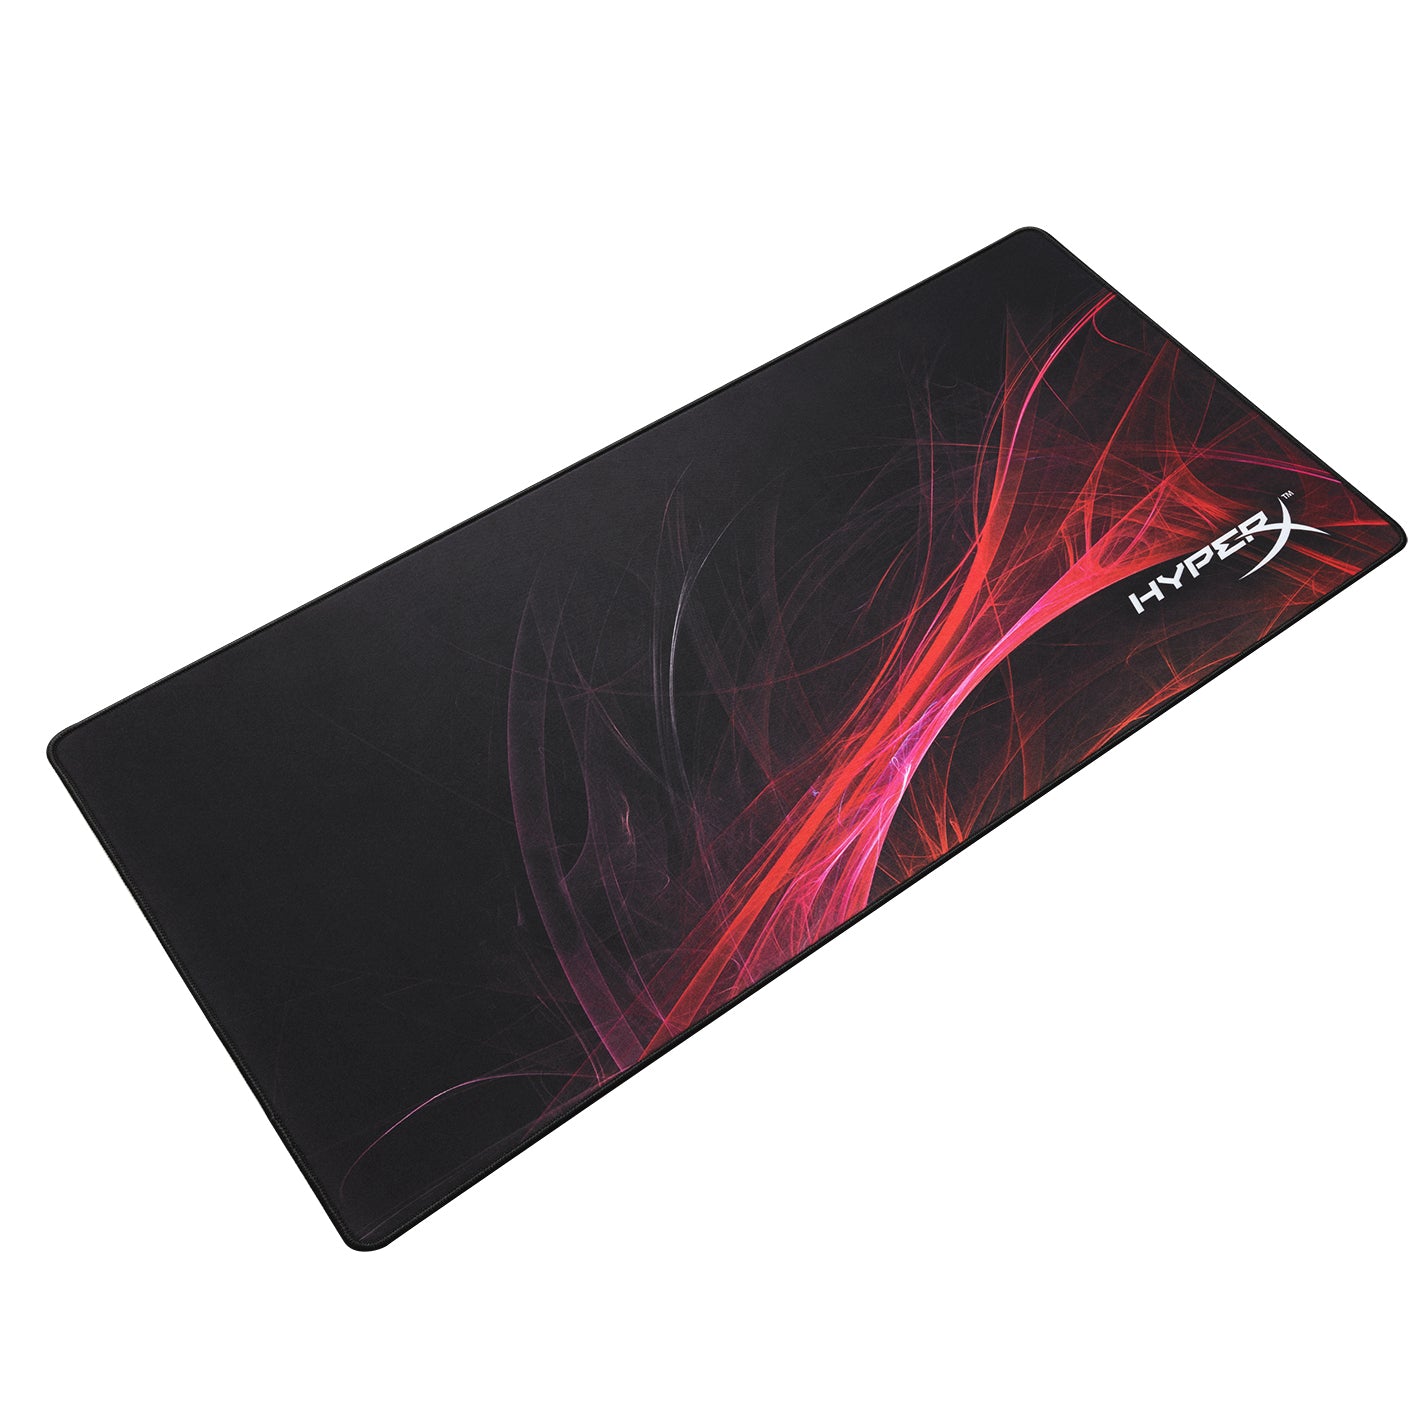 Mouse Pad Gamer Kingston HyperX FURY S Pro Gaming Size XL Speed Edition 90x42cm